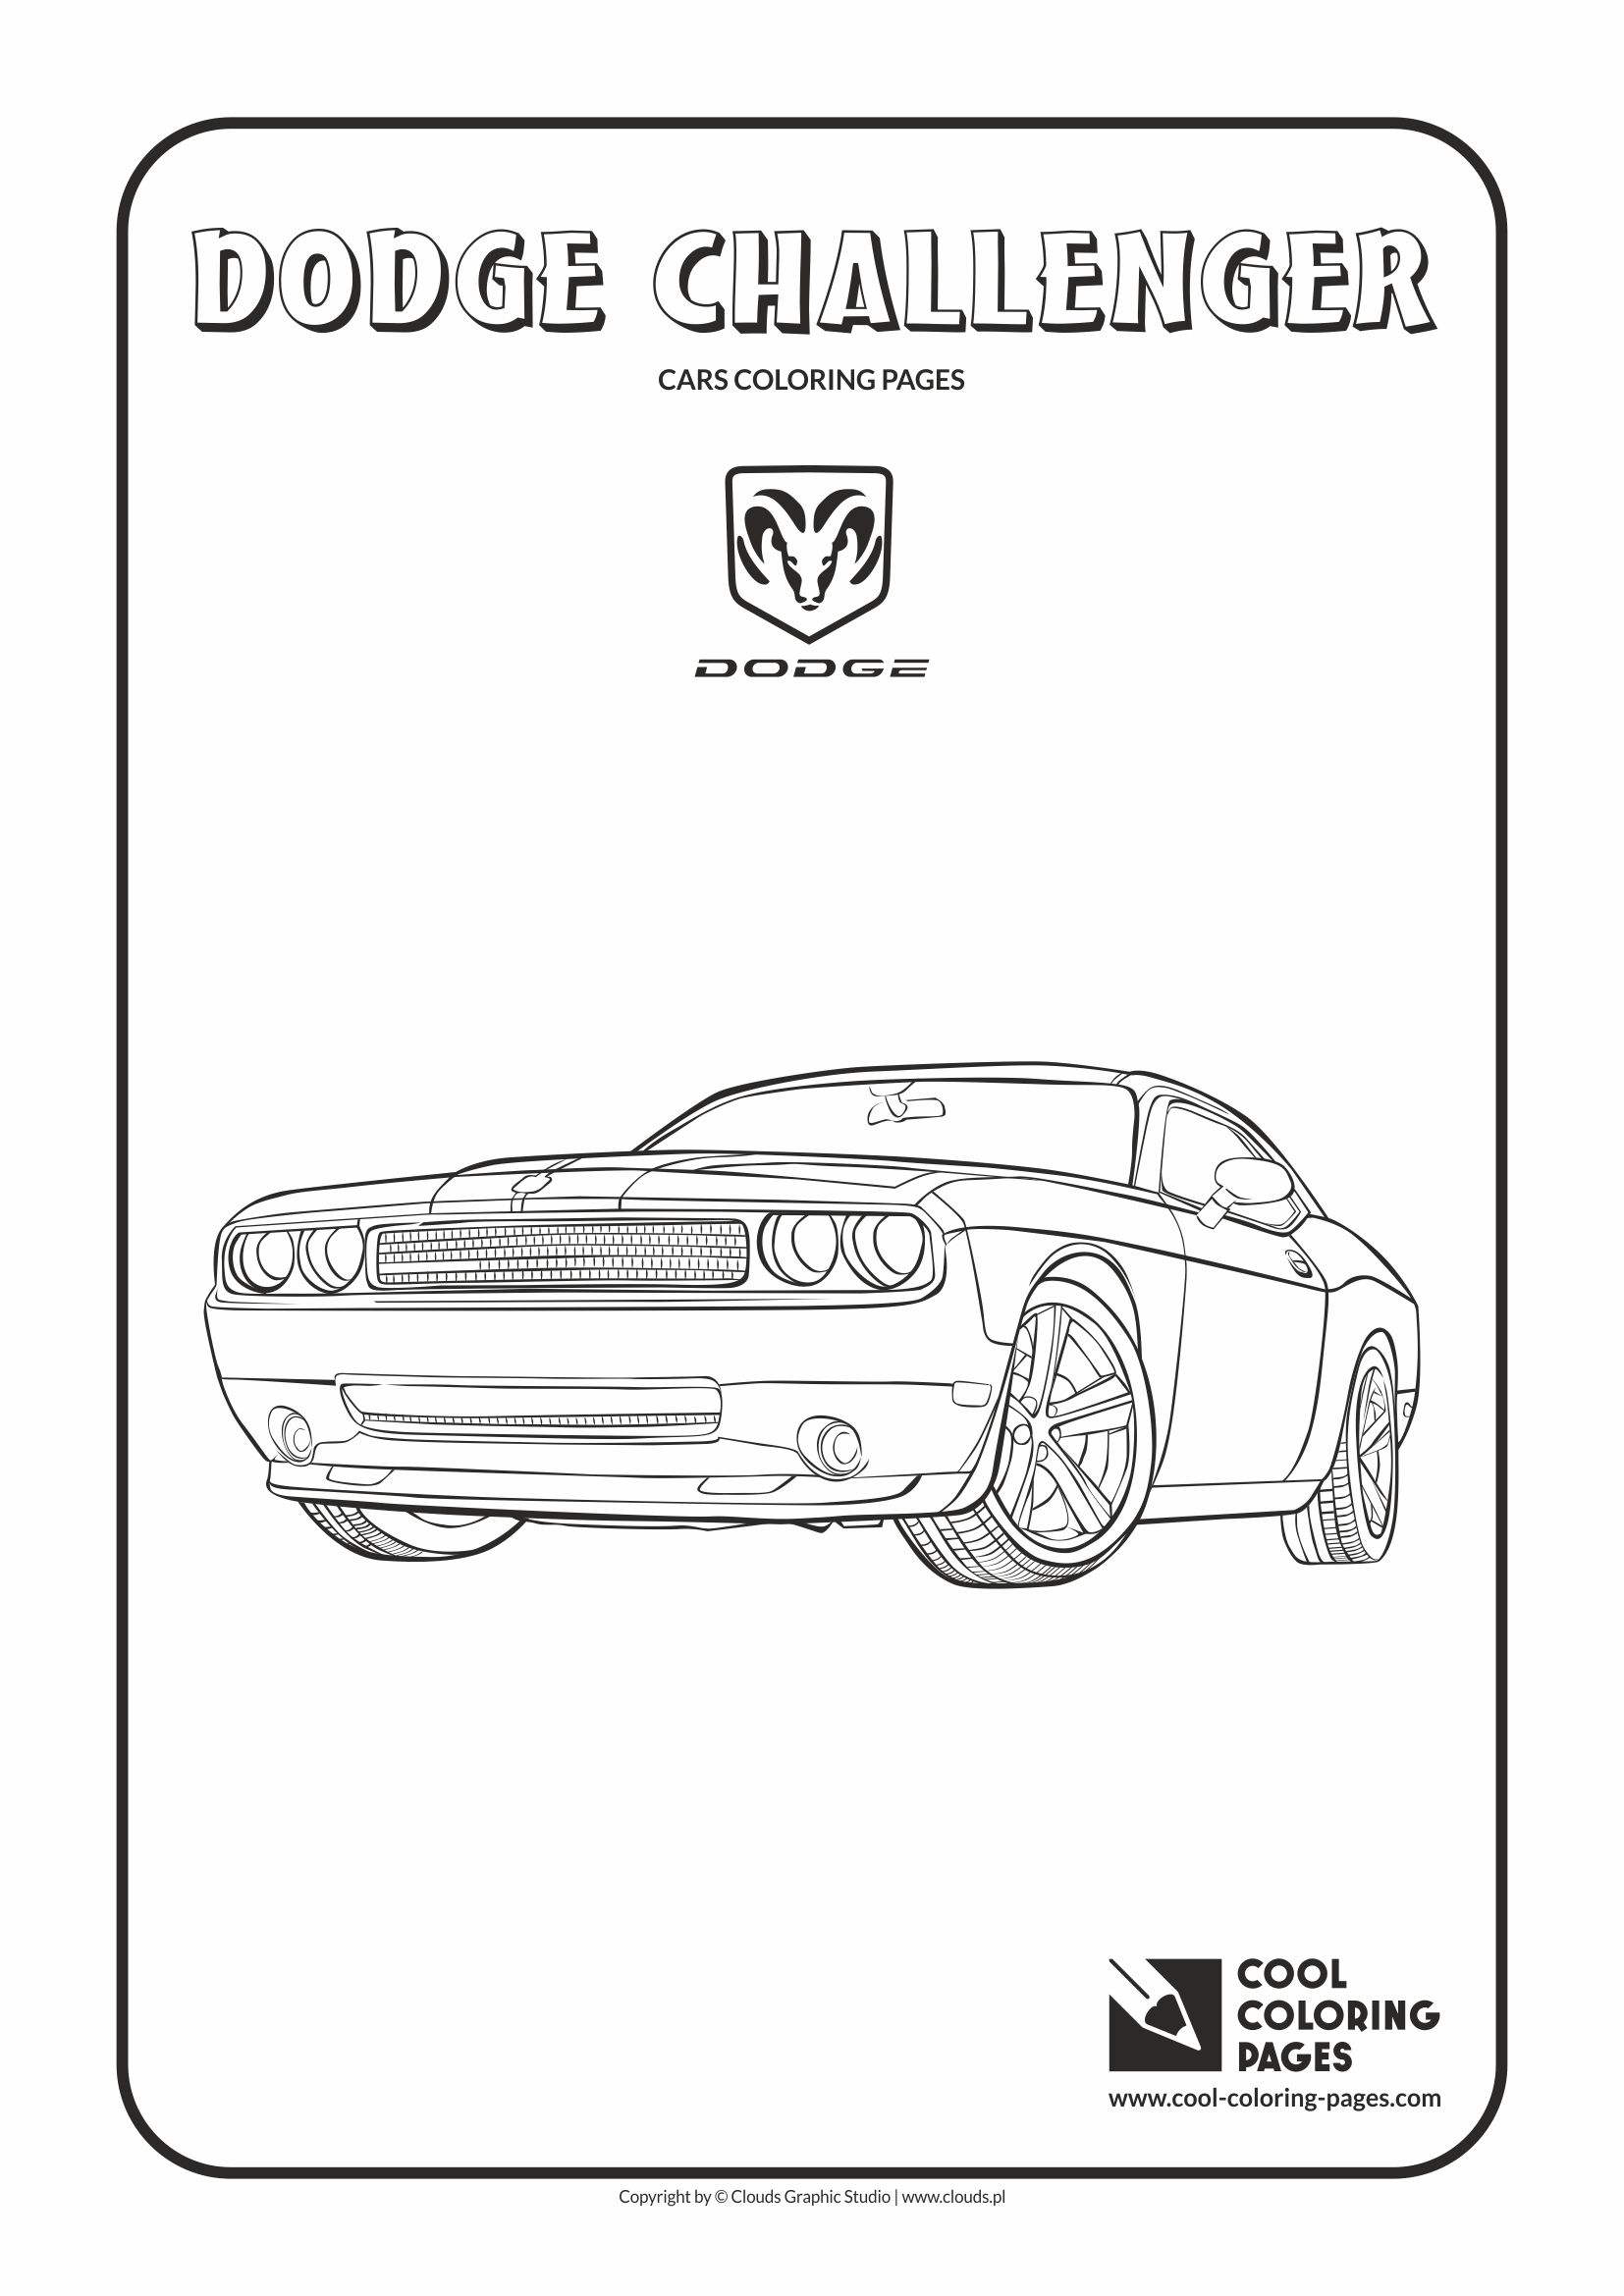 Cool Coloring Pages - Vehicles / Dodge Challenger / Coloring page with Dodge Challenger